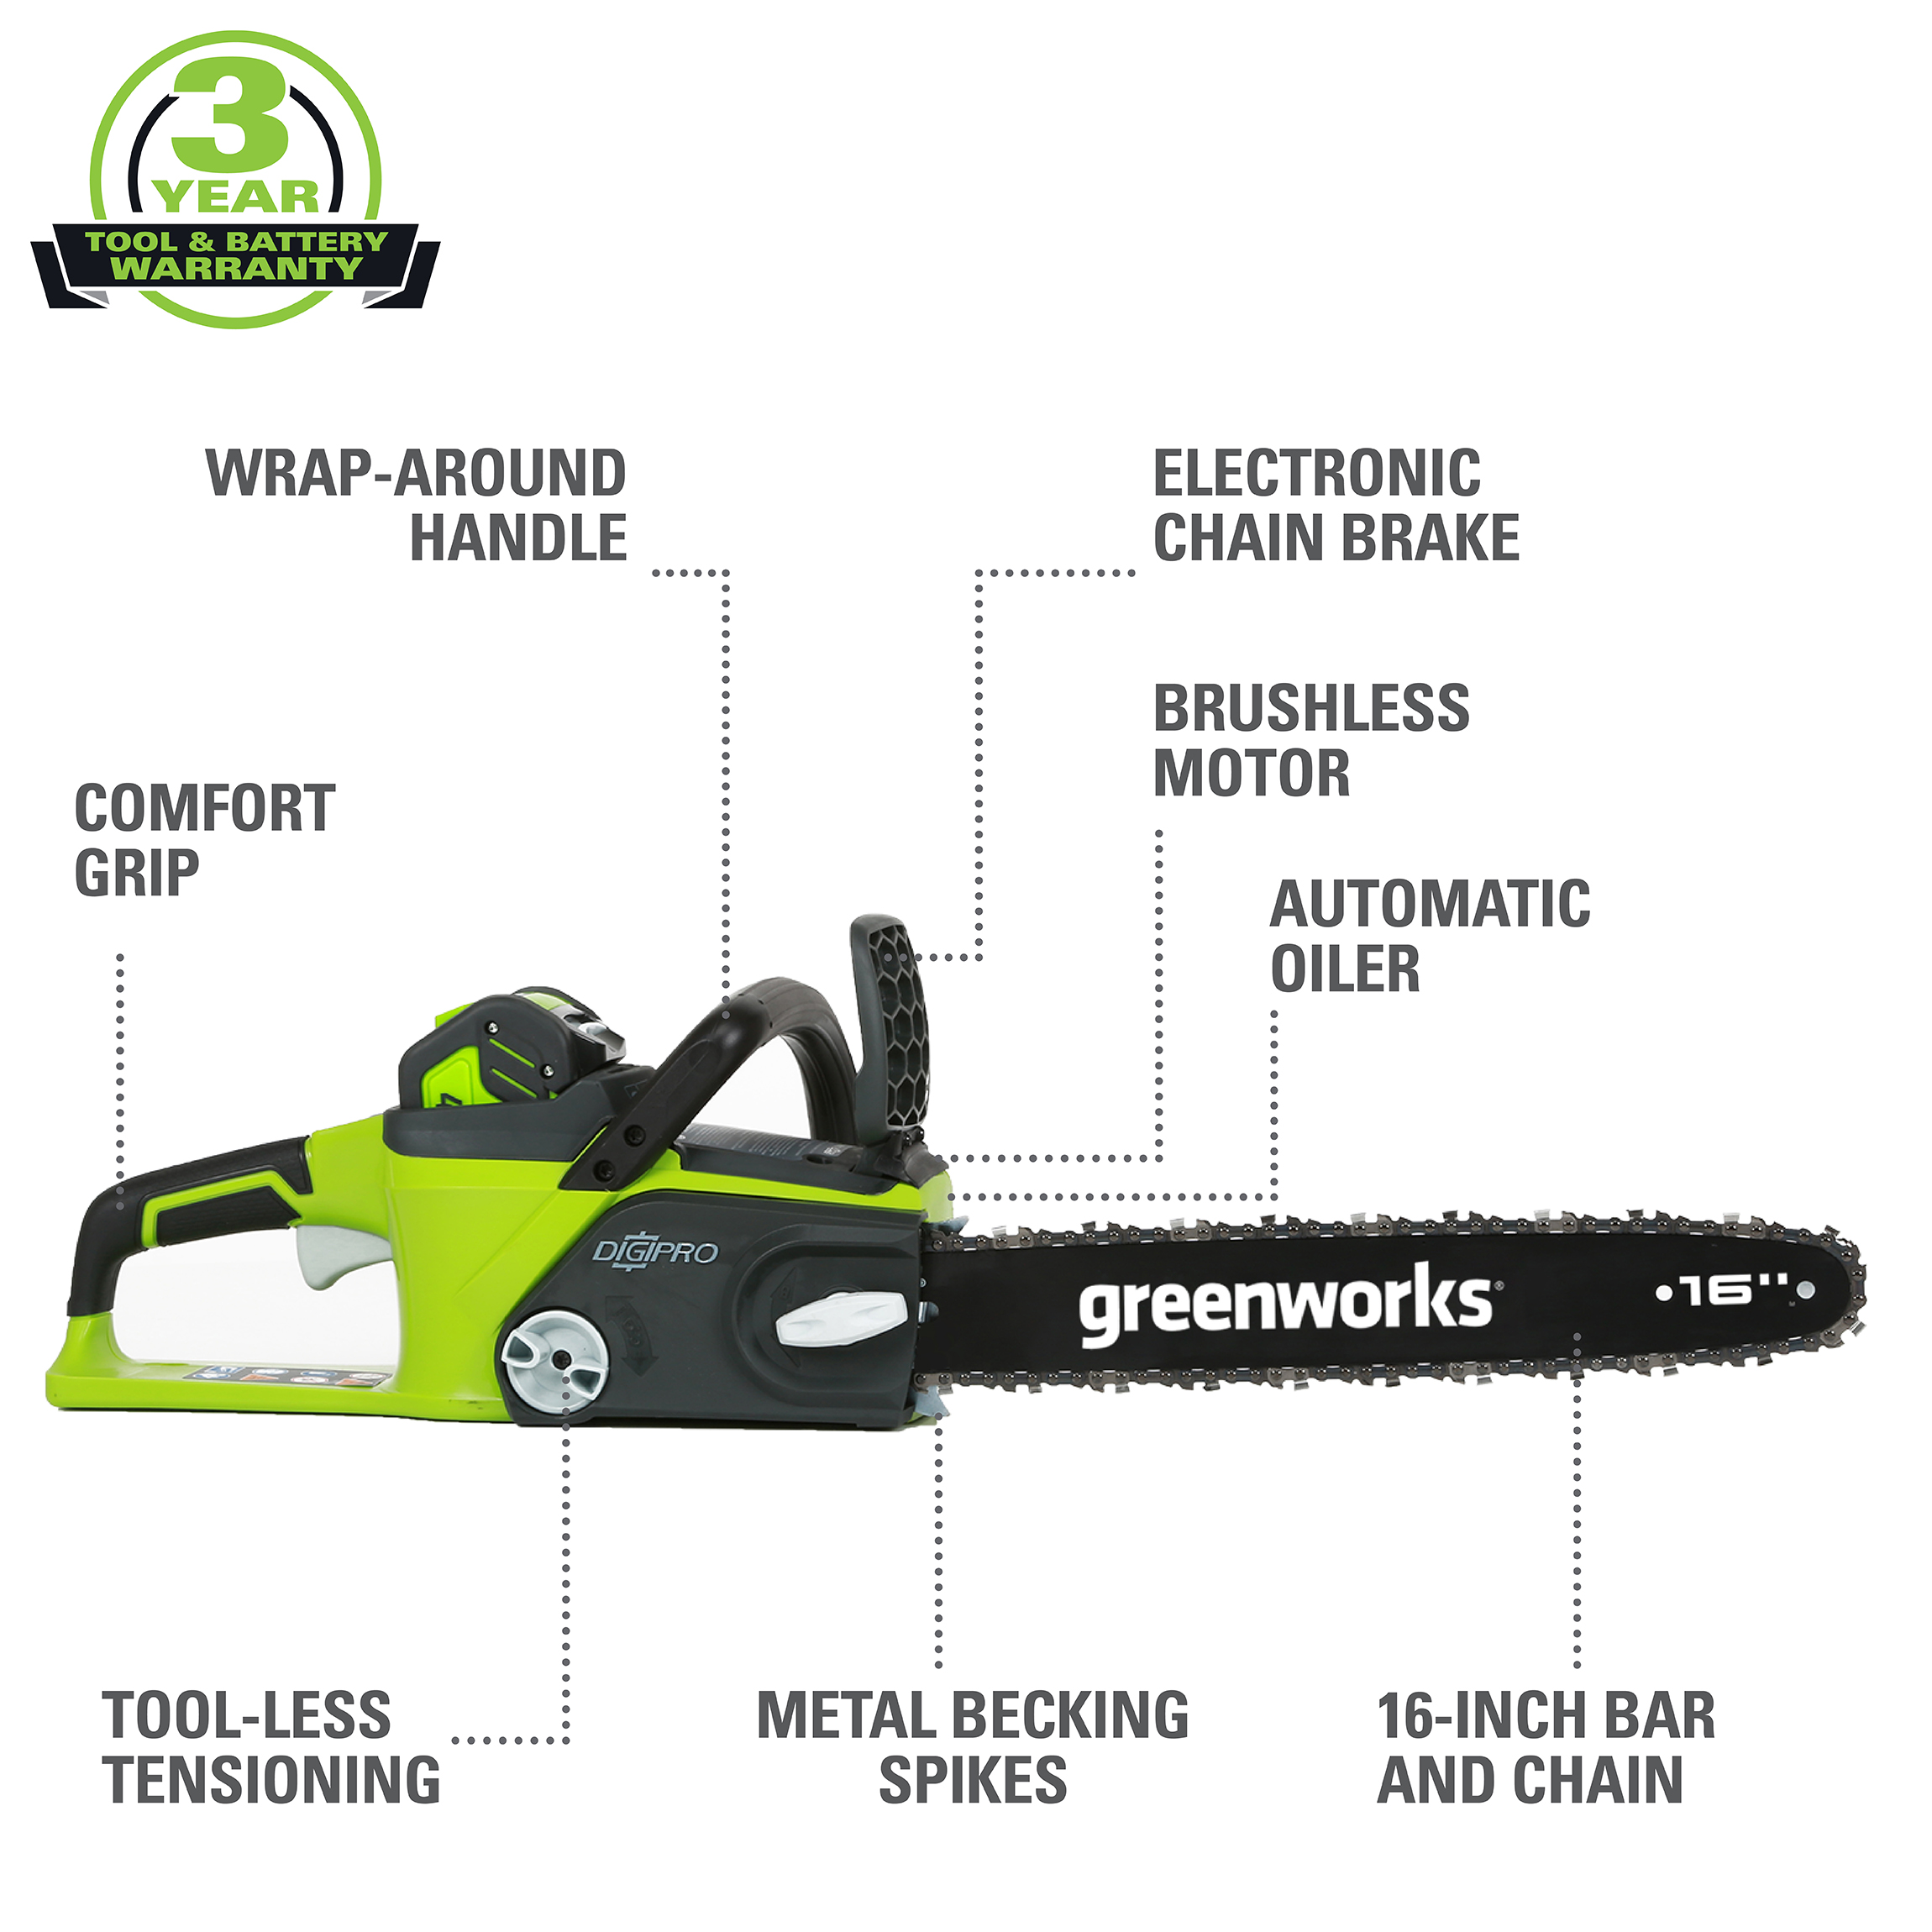 Greenworks GMax 40V 16 Inch Bar DigiPro Cordless Chainsaw (Battery Not Included) - image 3 of 13